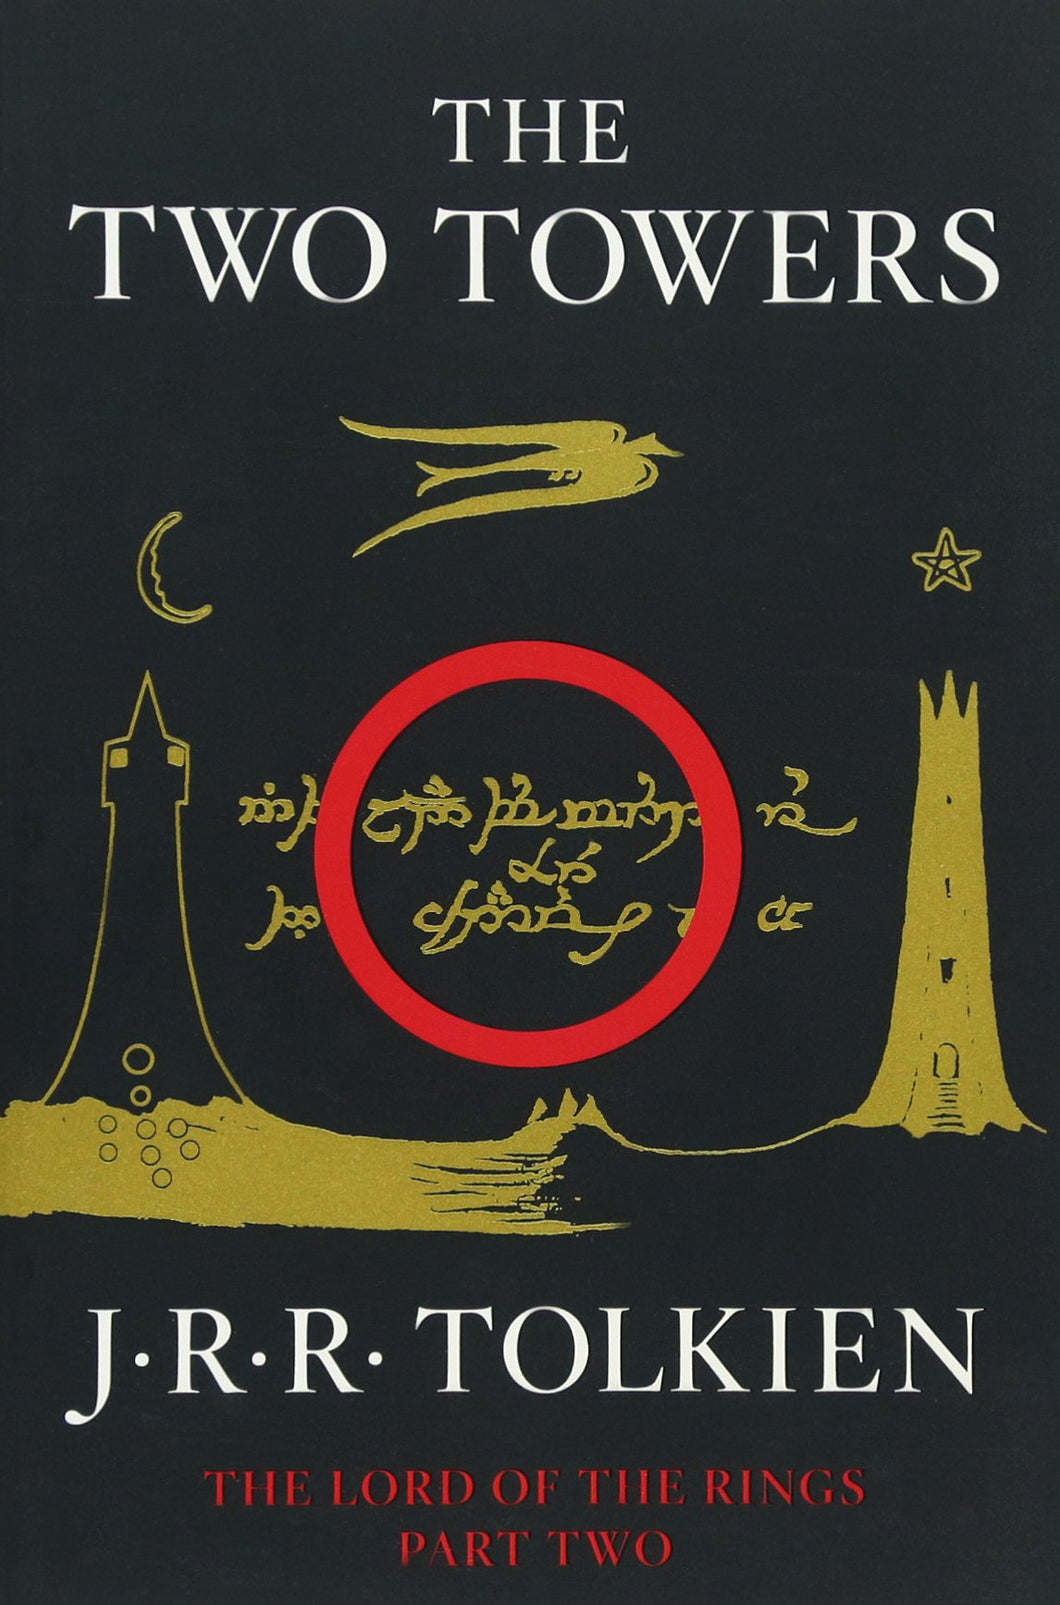 THE TWO TOWERS: THE LORD OF THE RINGS PART TWO - J. R. R. Tolkien